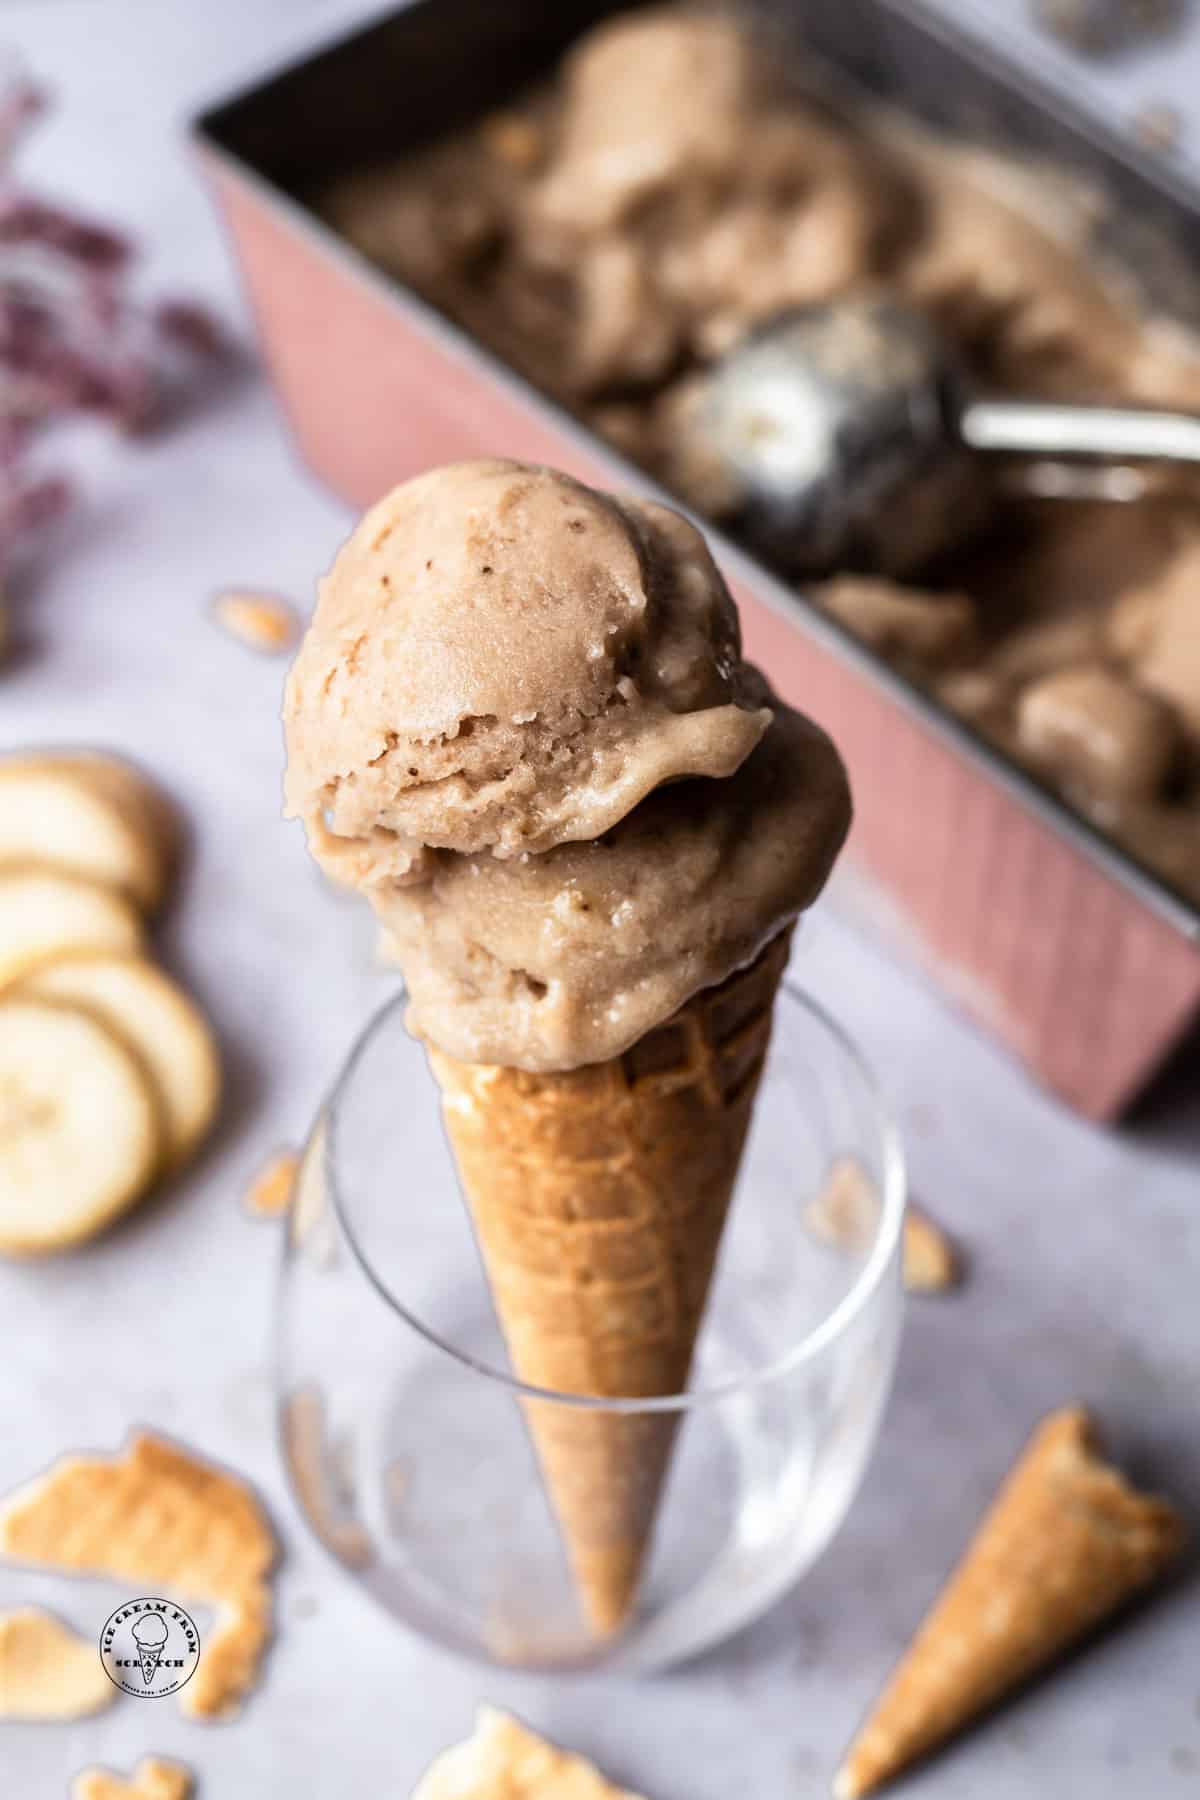 homemade banana ice cream scooped into a sugar cone and propped up in a blass. in the background is the pan of ice cream, banana slices, and pieces of cones.